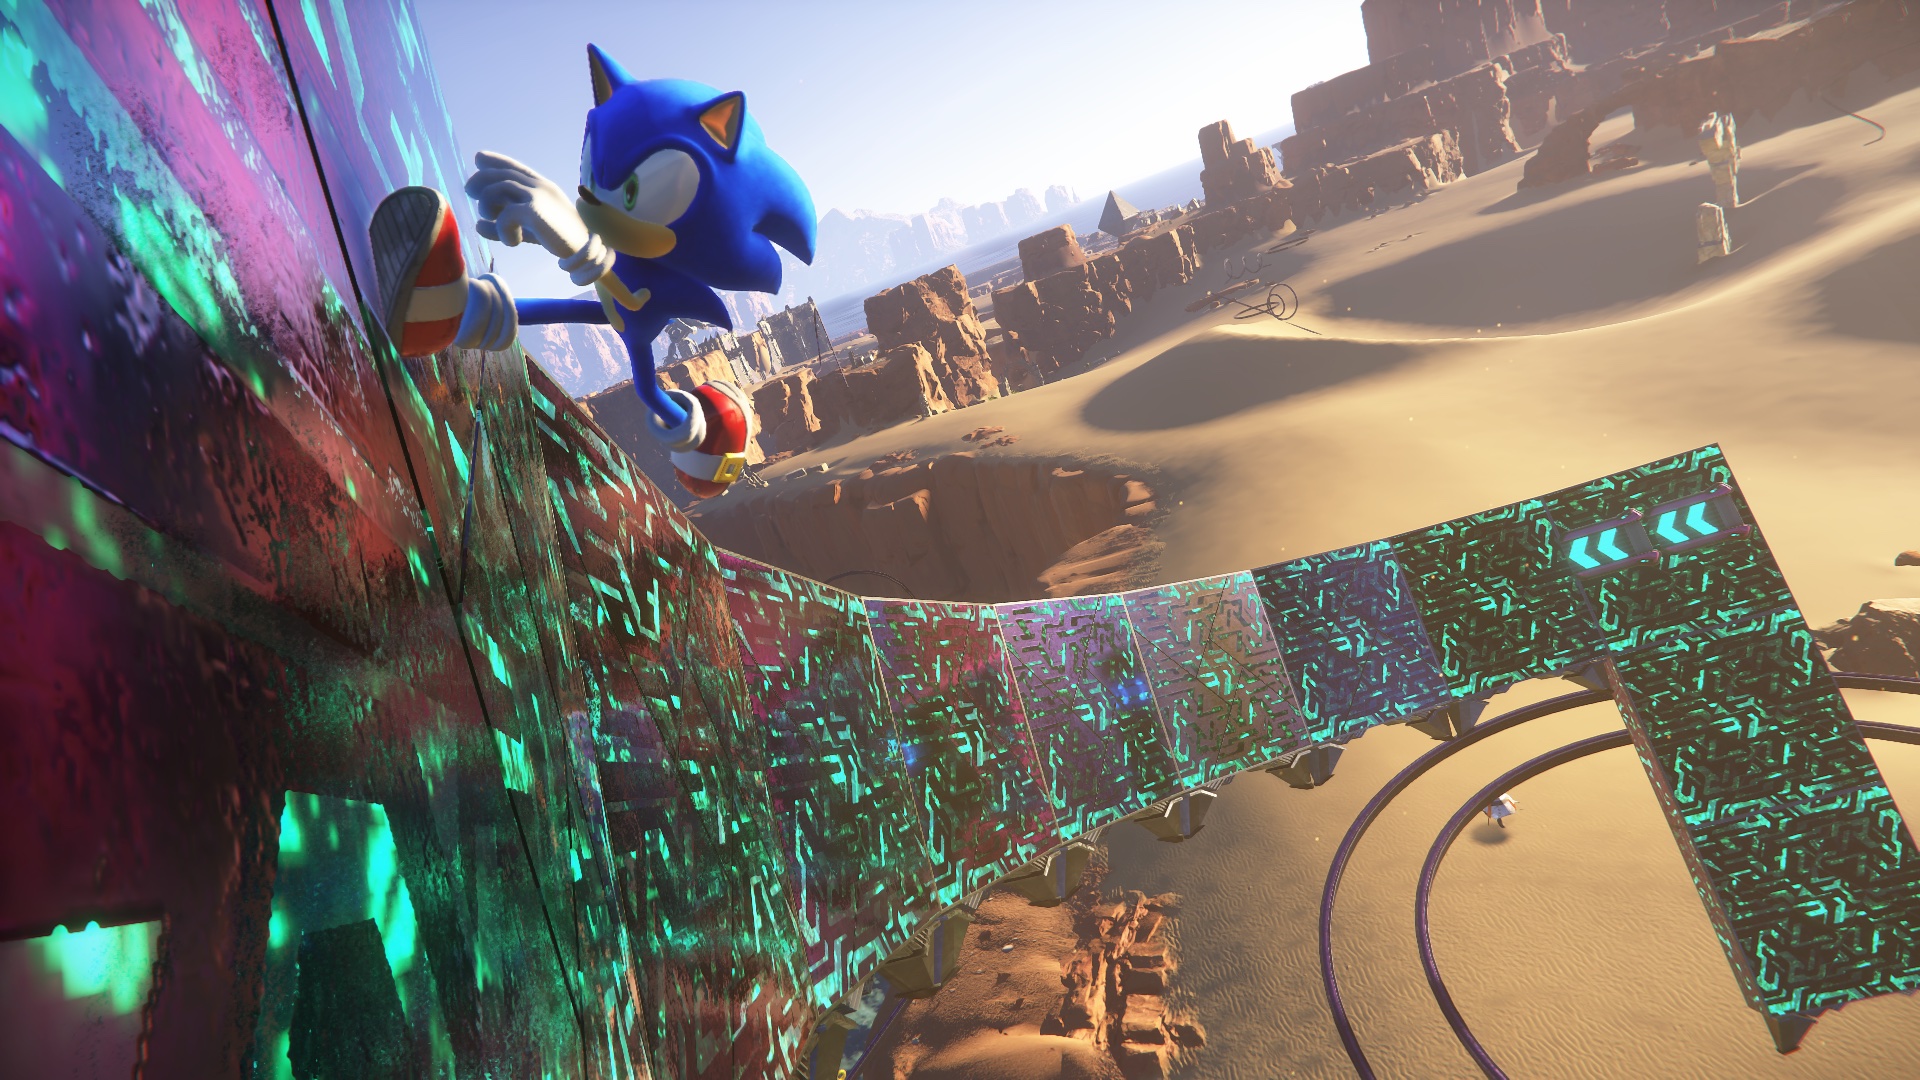 Sonic Frontiers: The Final Horizon Review - Noisy Pixel